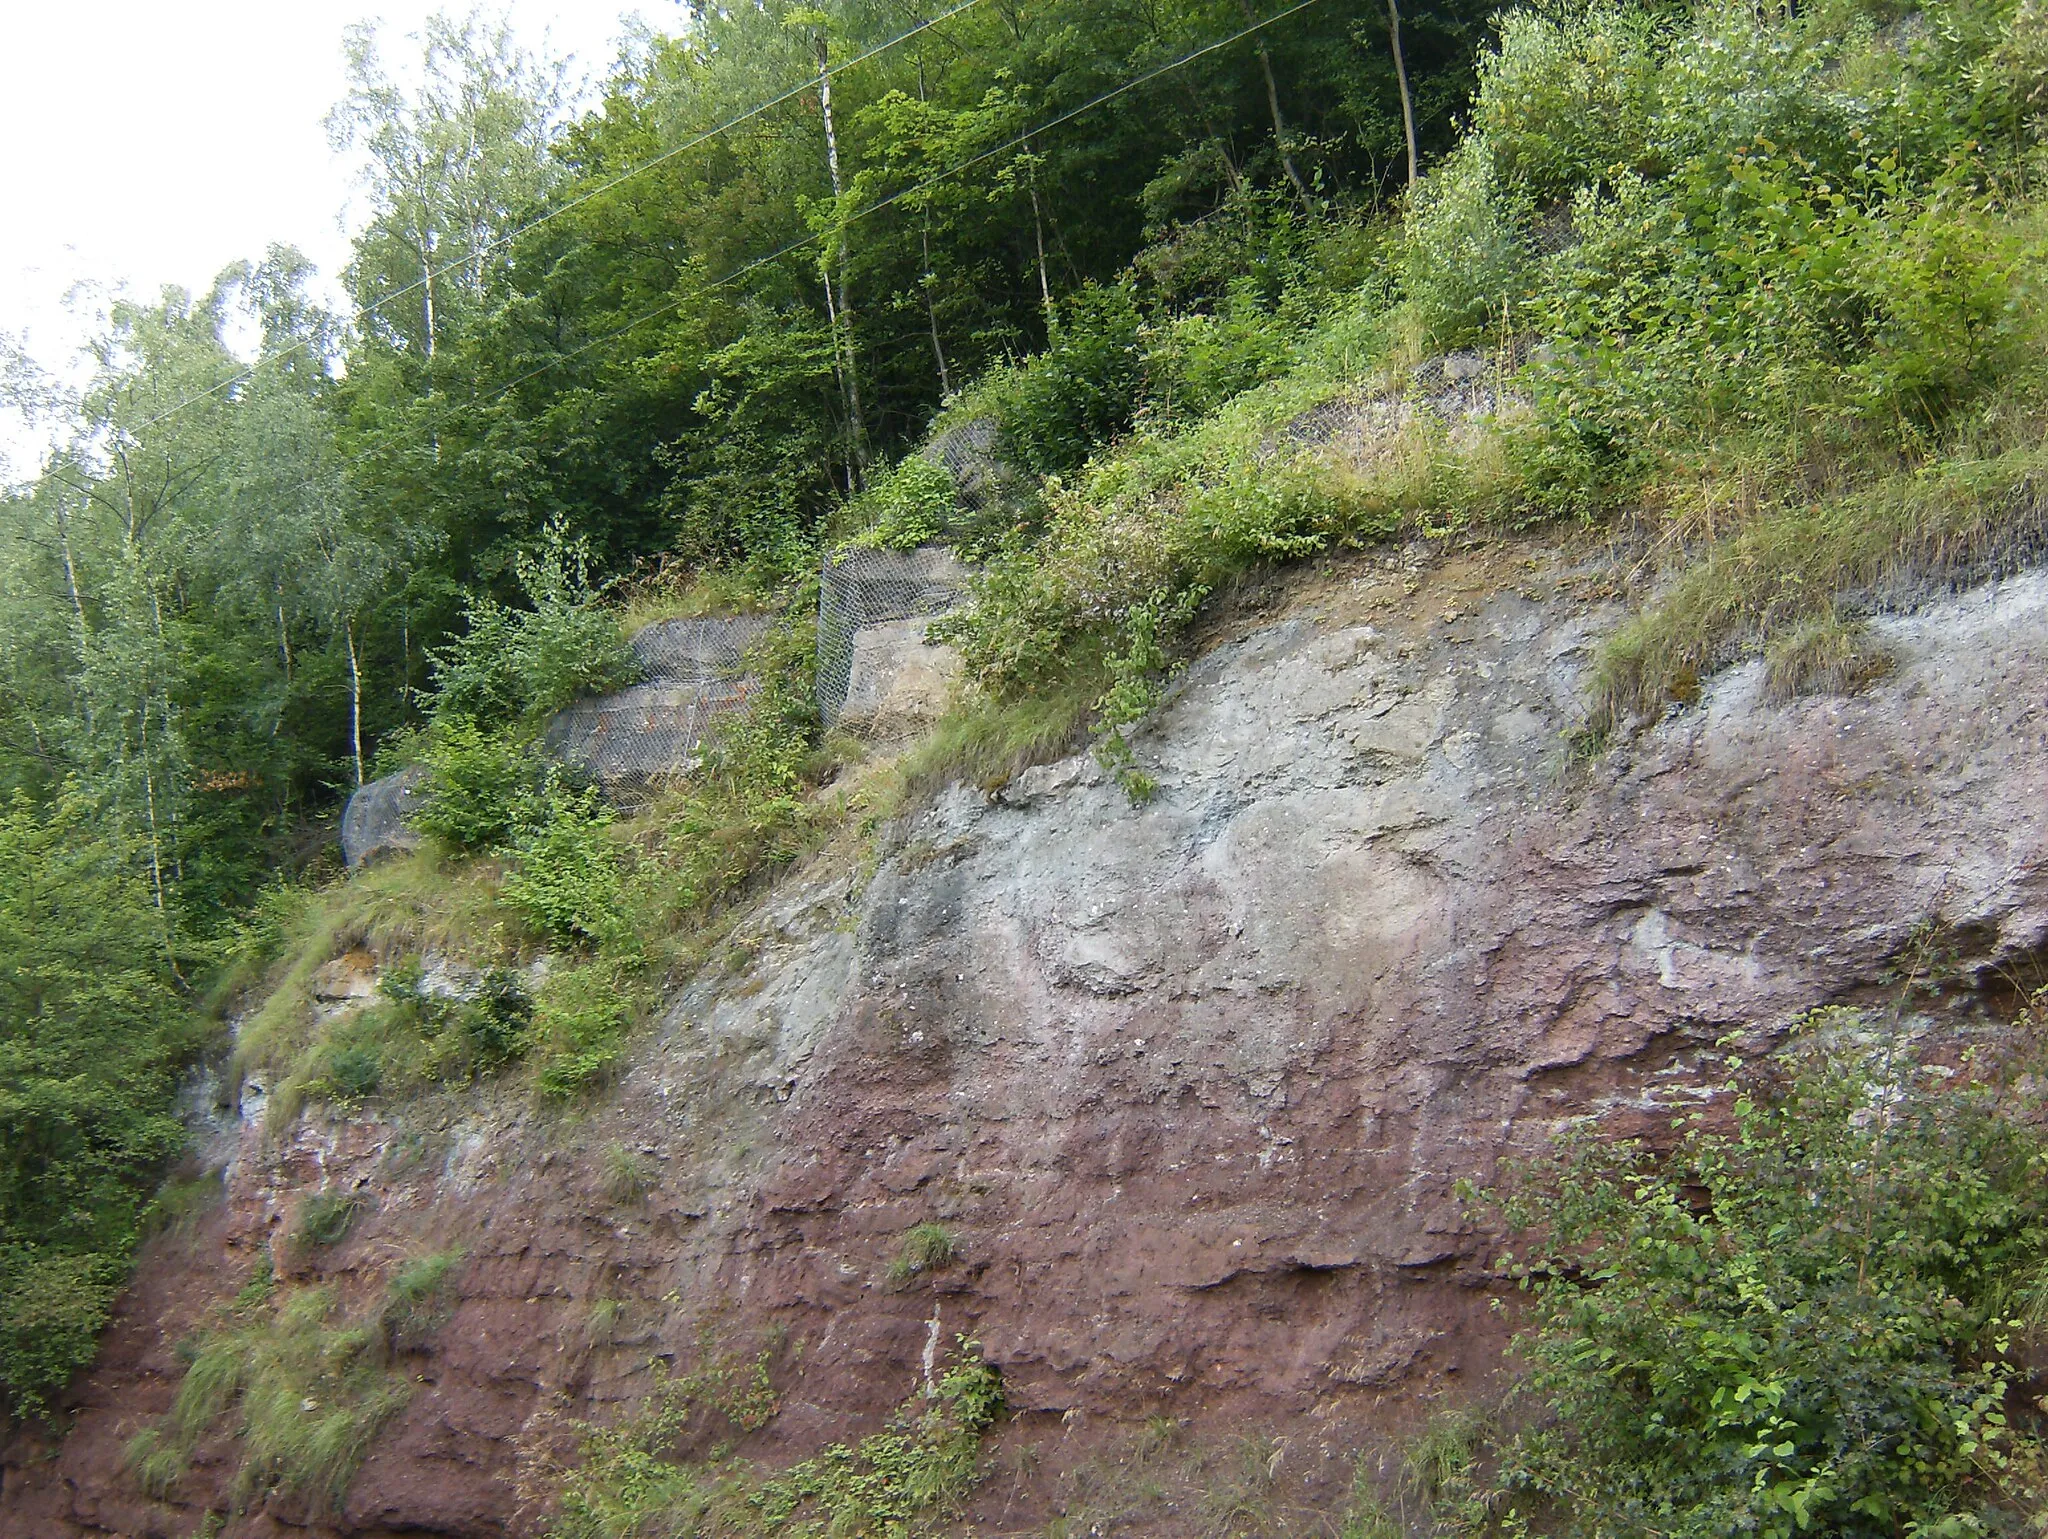 Photo showing: Something very special for people interested in geology: Outcrop in the so called "Schiefergasse" above Milbitz village (suburb of Gera, Thuringia), showing the so called Zechstein transgression. Terrestrial redbeds are overlain by a transgressional conglomerate grading into marine limestones (“Mutterflöz”, secured against rockfall by mesh wire and partly covered by vegetation).